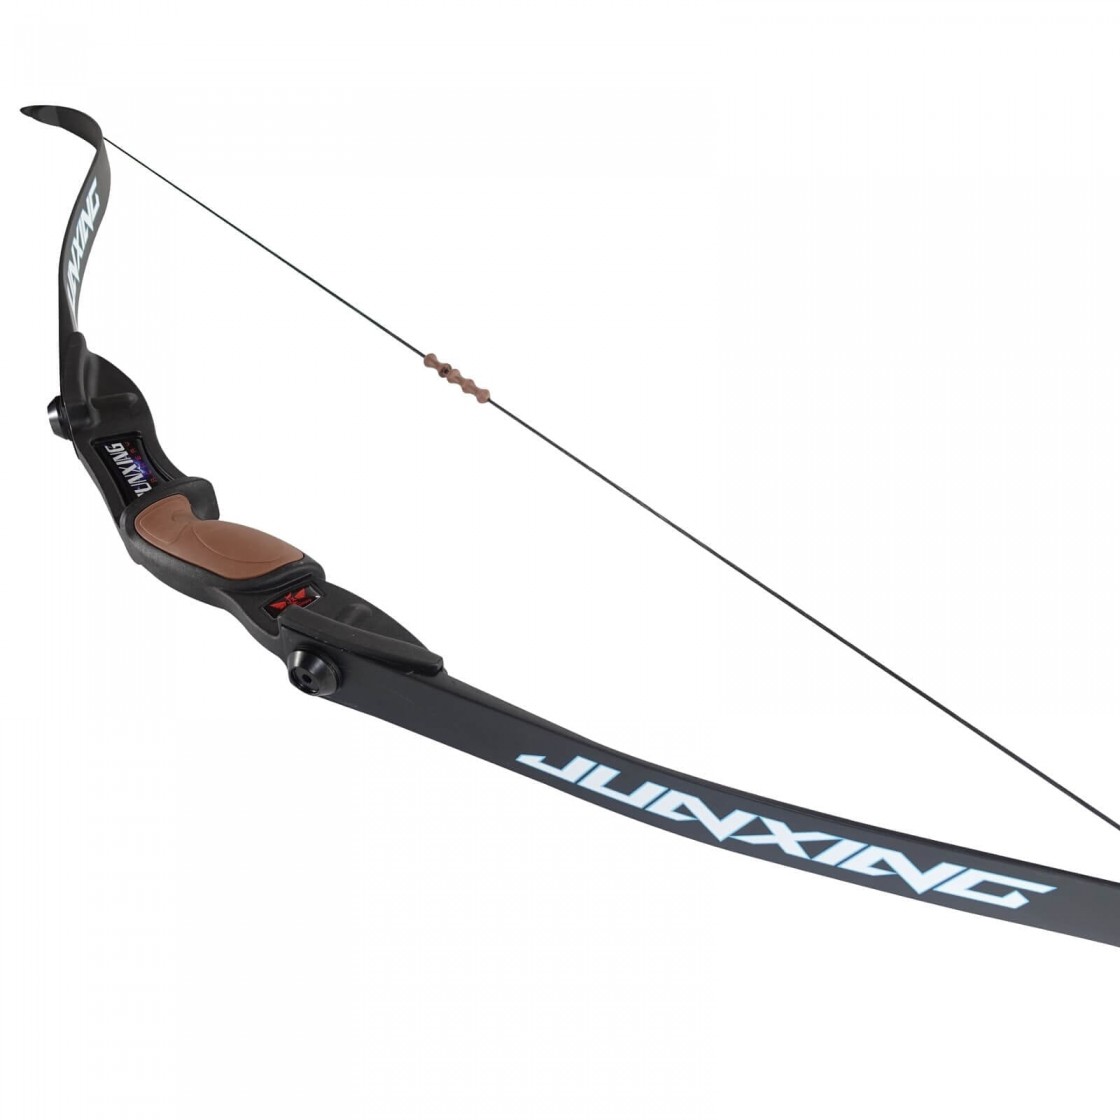 Shooting A Junxing Recurve Bow: A Beginner's First Impressions